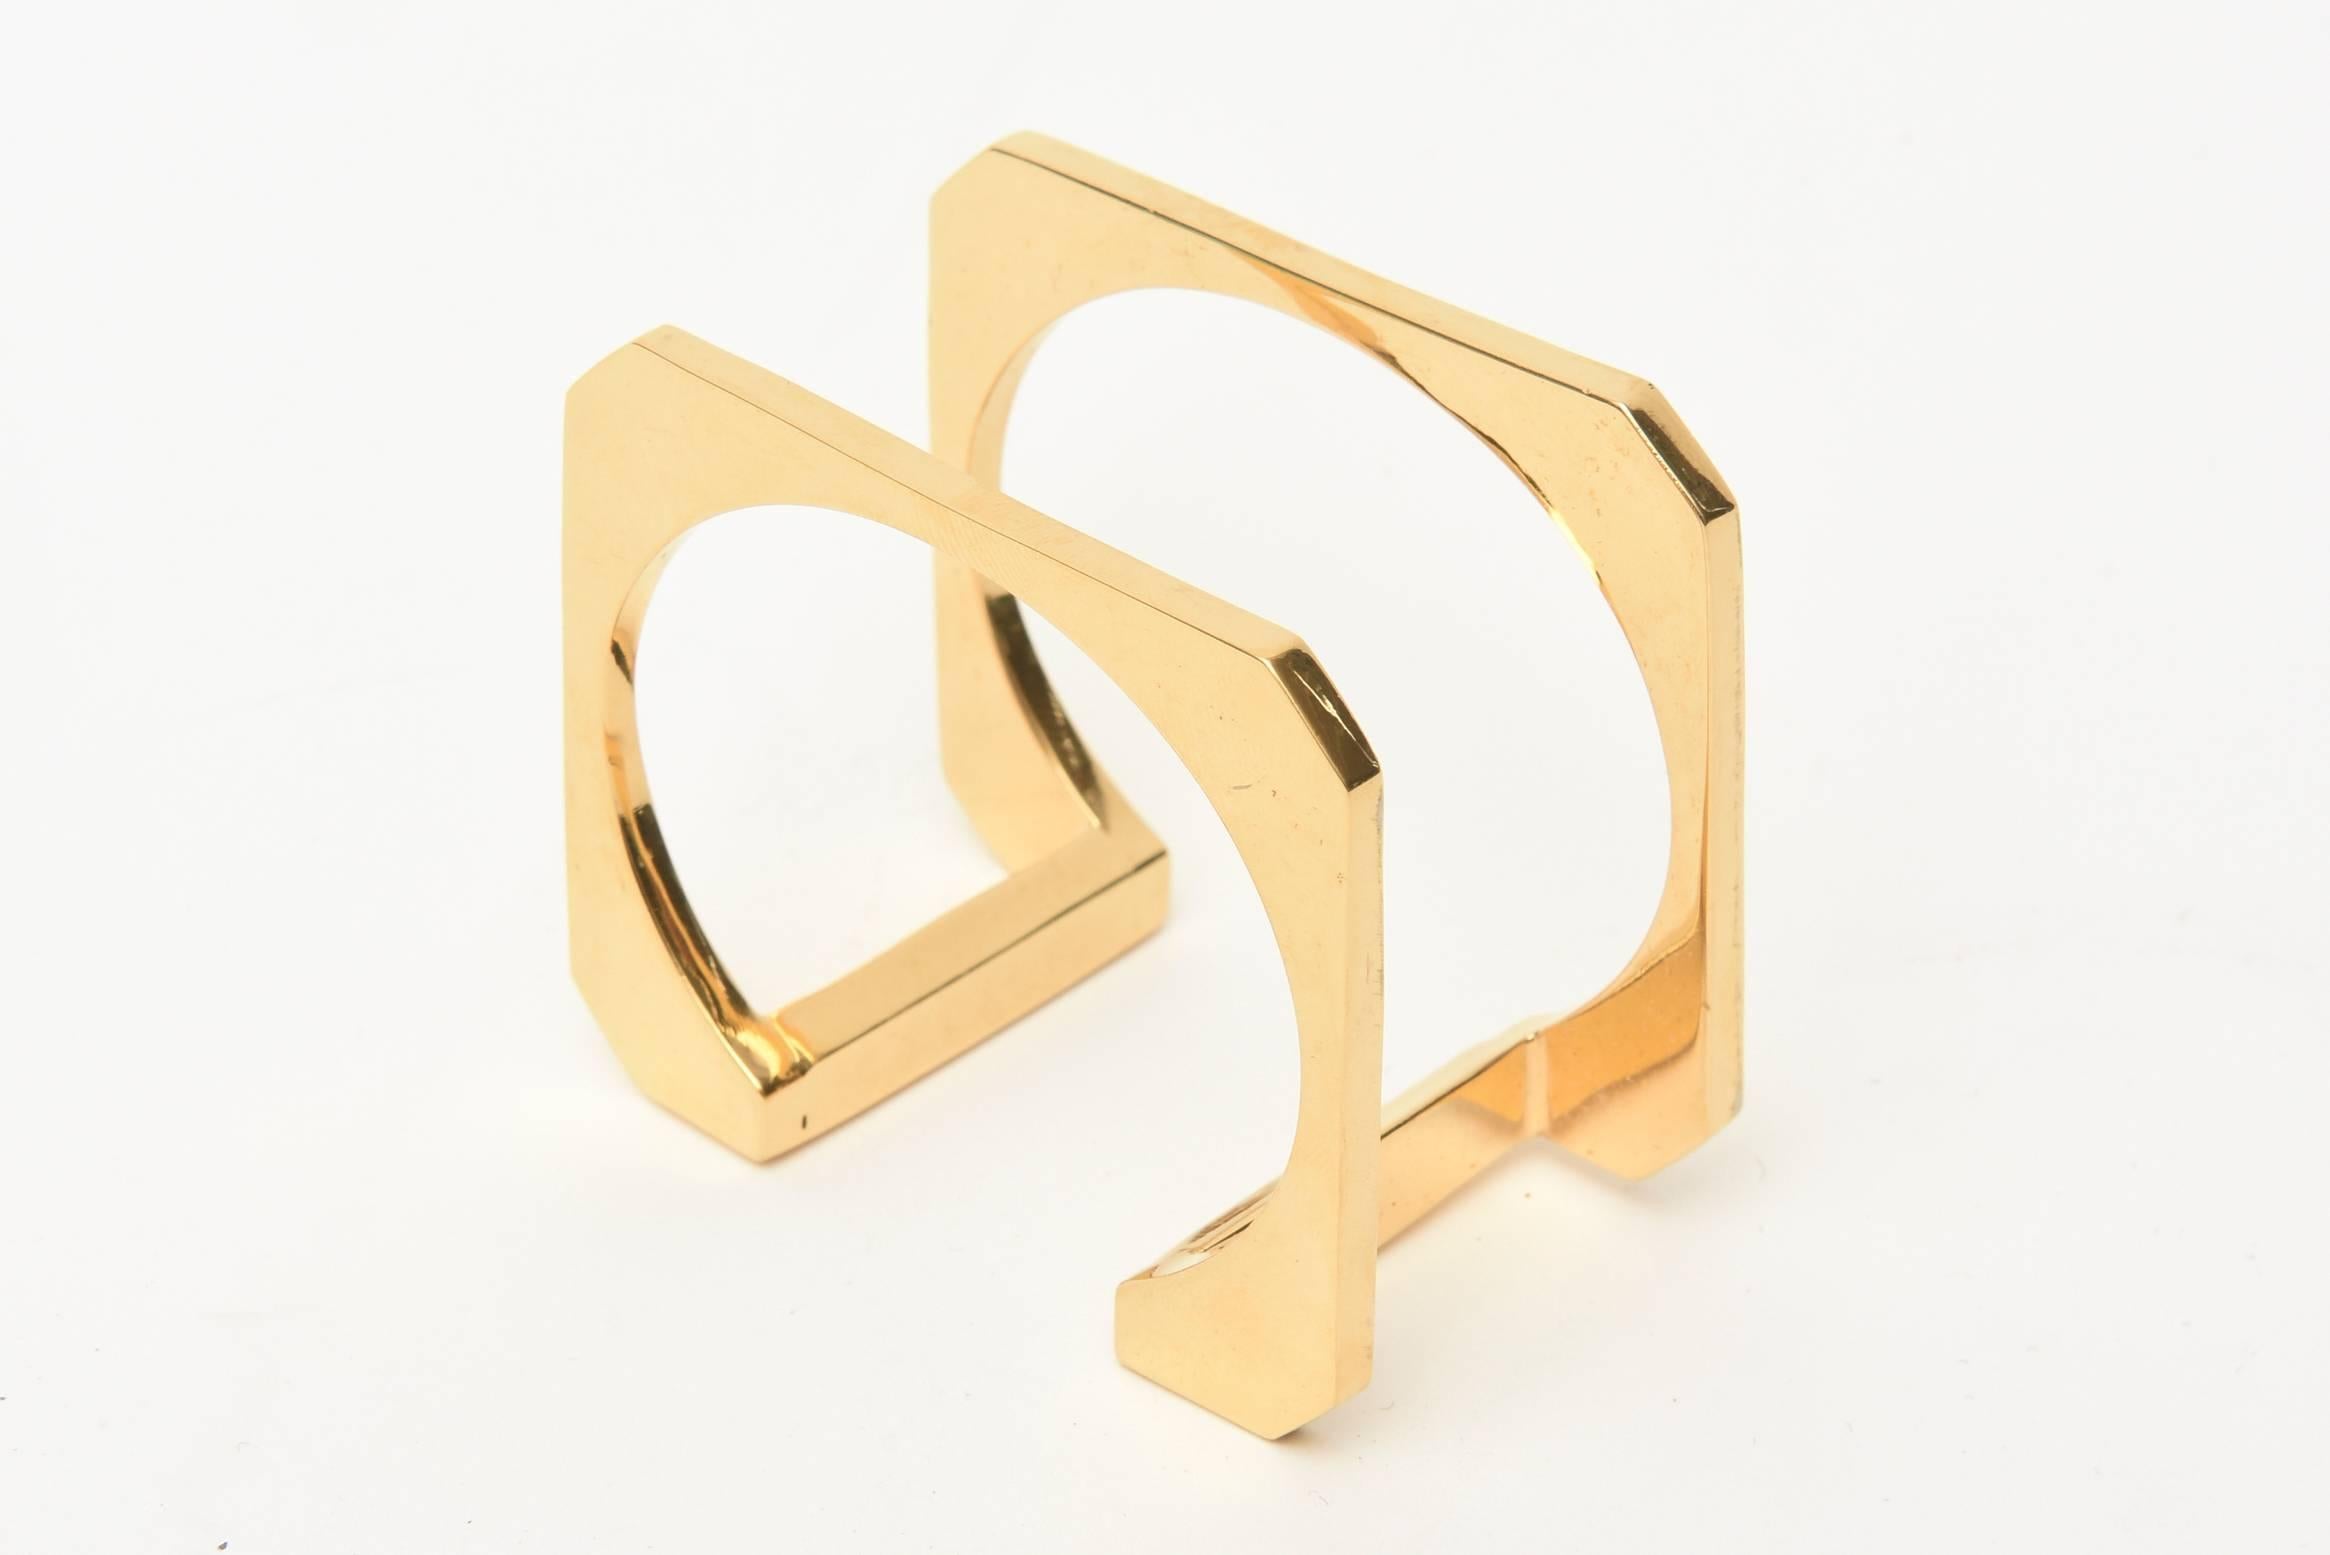 This dynamic and sculptural cuff bracelet is modernist and architectural all at the same time. It is gold plated and from the 80's. Upside down, it looks like an inverted U. It slips on the wrist and will fit a small wrist. It will only go over a